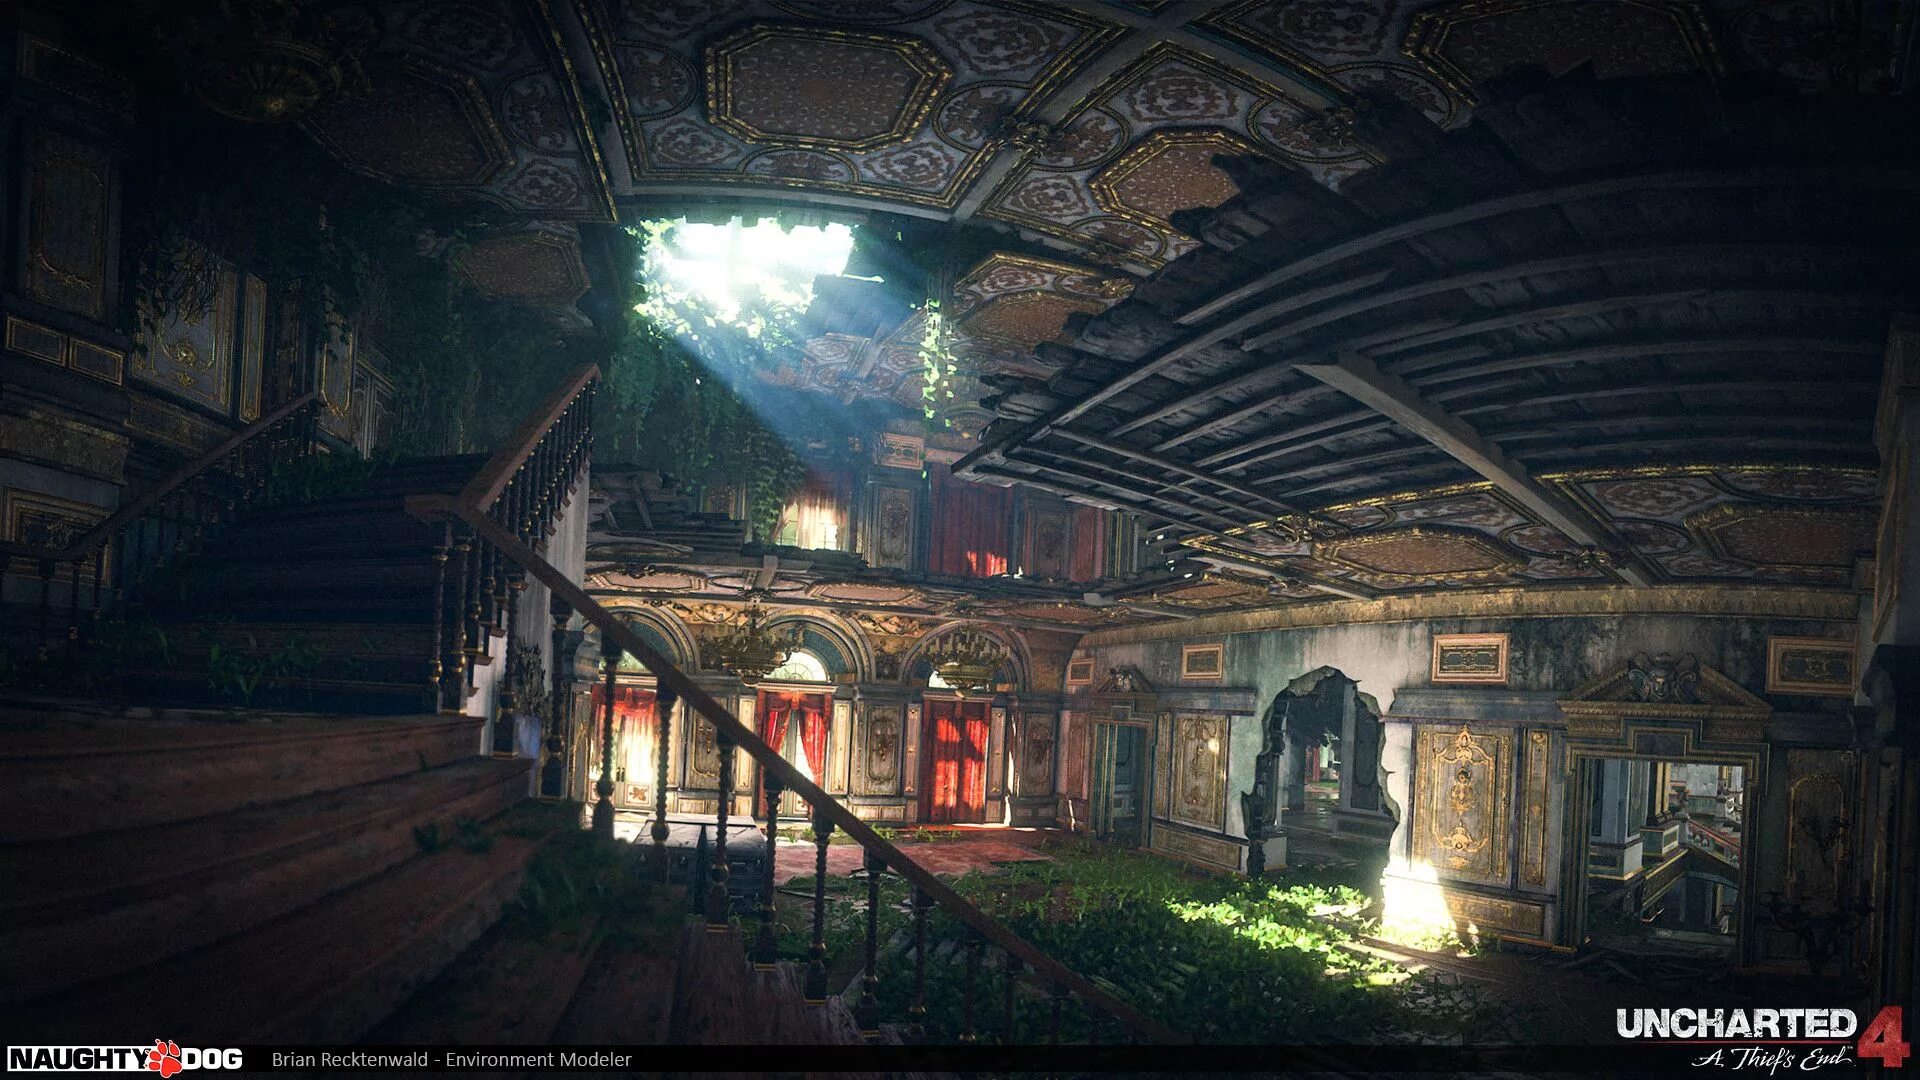 Uncharted 4 environment. Uncharted 4 Concept Art. Либерталия Uncharted 4. Uncharted 4 Art.